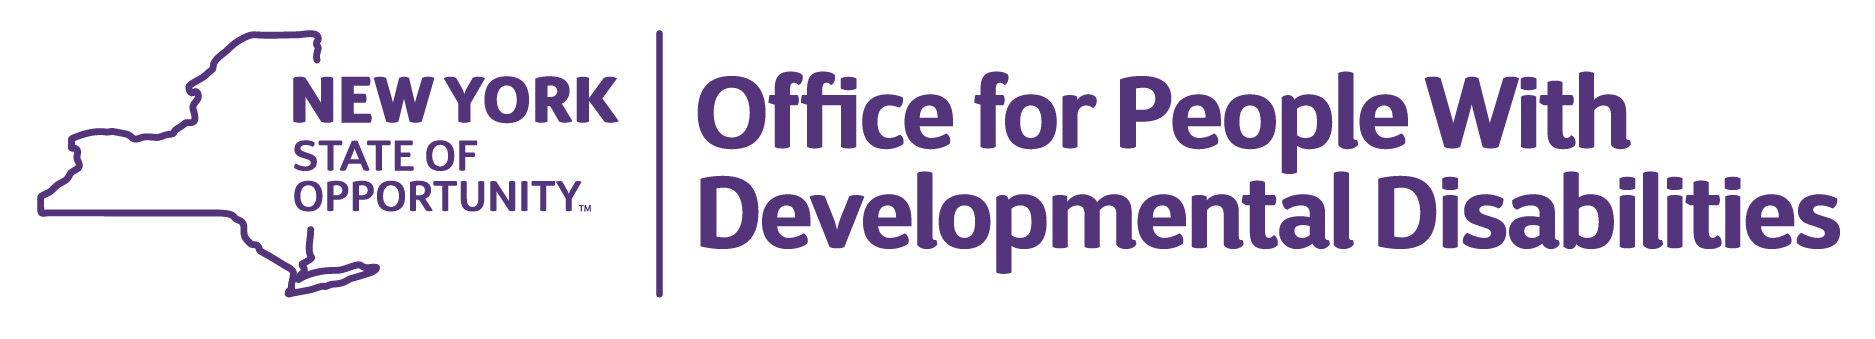 Office for People with Developmental Disabilities logo